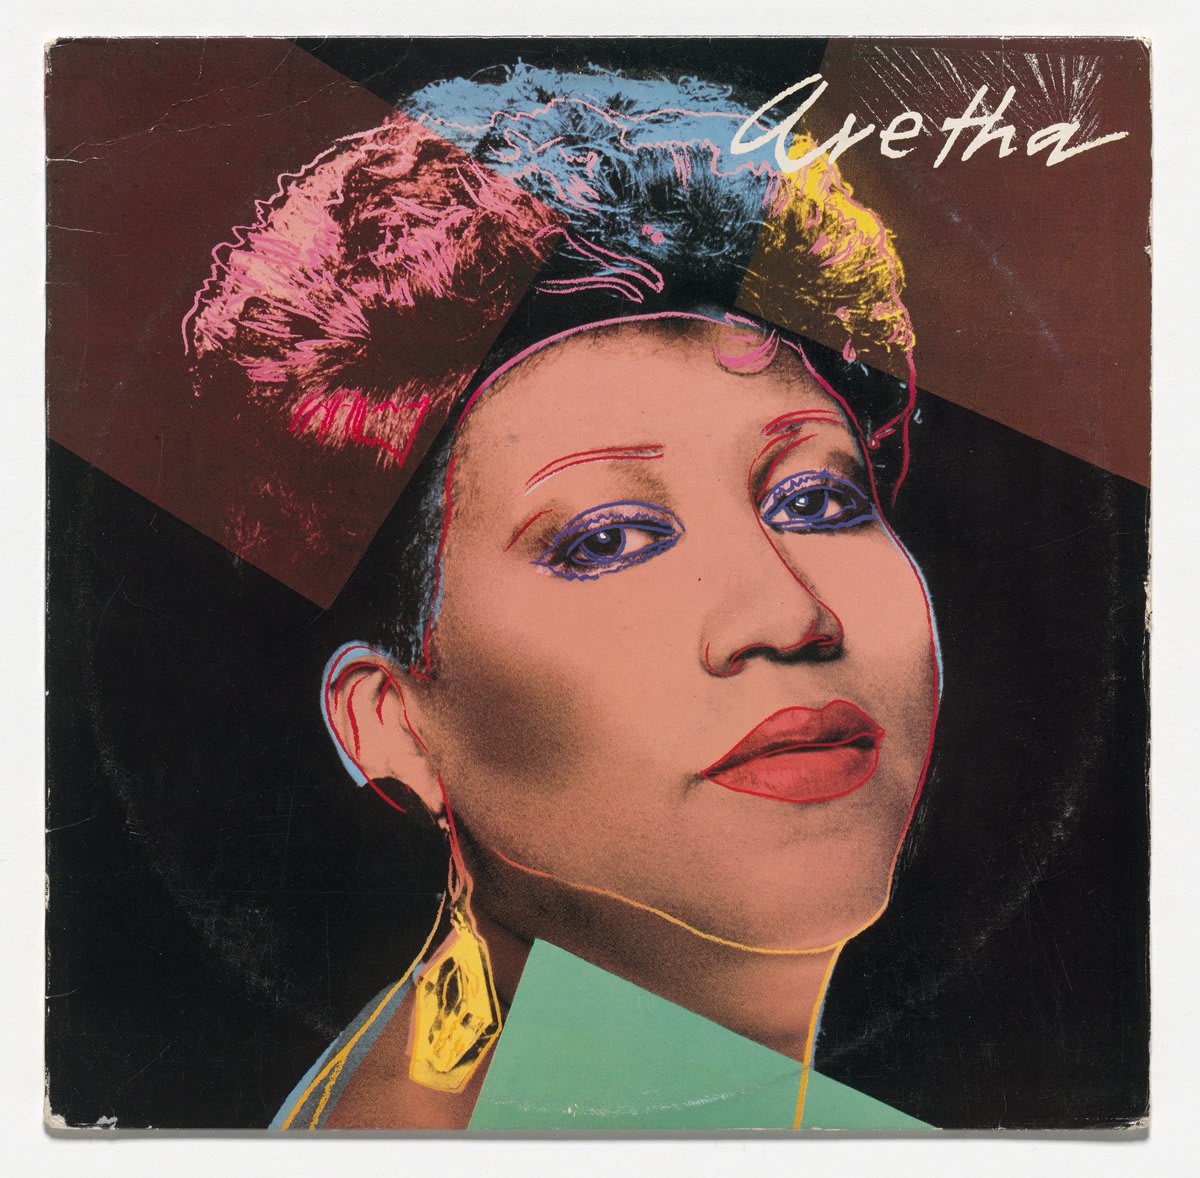 Artistry inspires artistry. Remembering the ‘Queen of Soul,’ Aretha Franklin with this 1986 MoMACollection album cover by Andy Warhol.